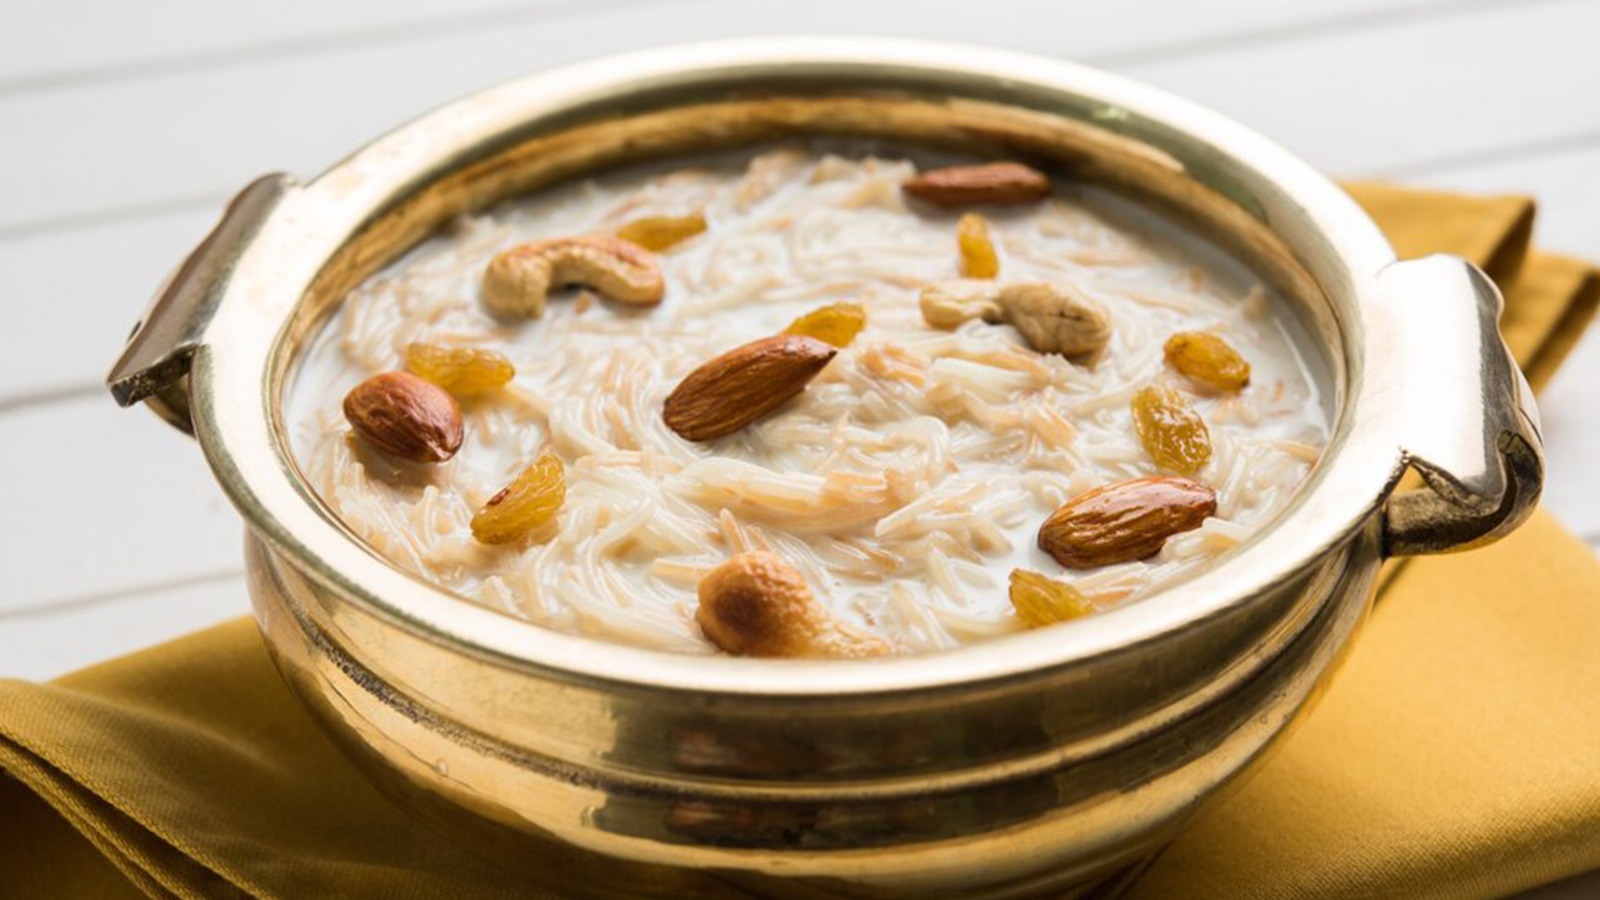 A bowl of Payasam with nuts and raisins, is a delectable South Indian dessert in Austin.